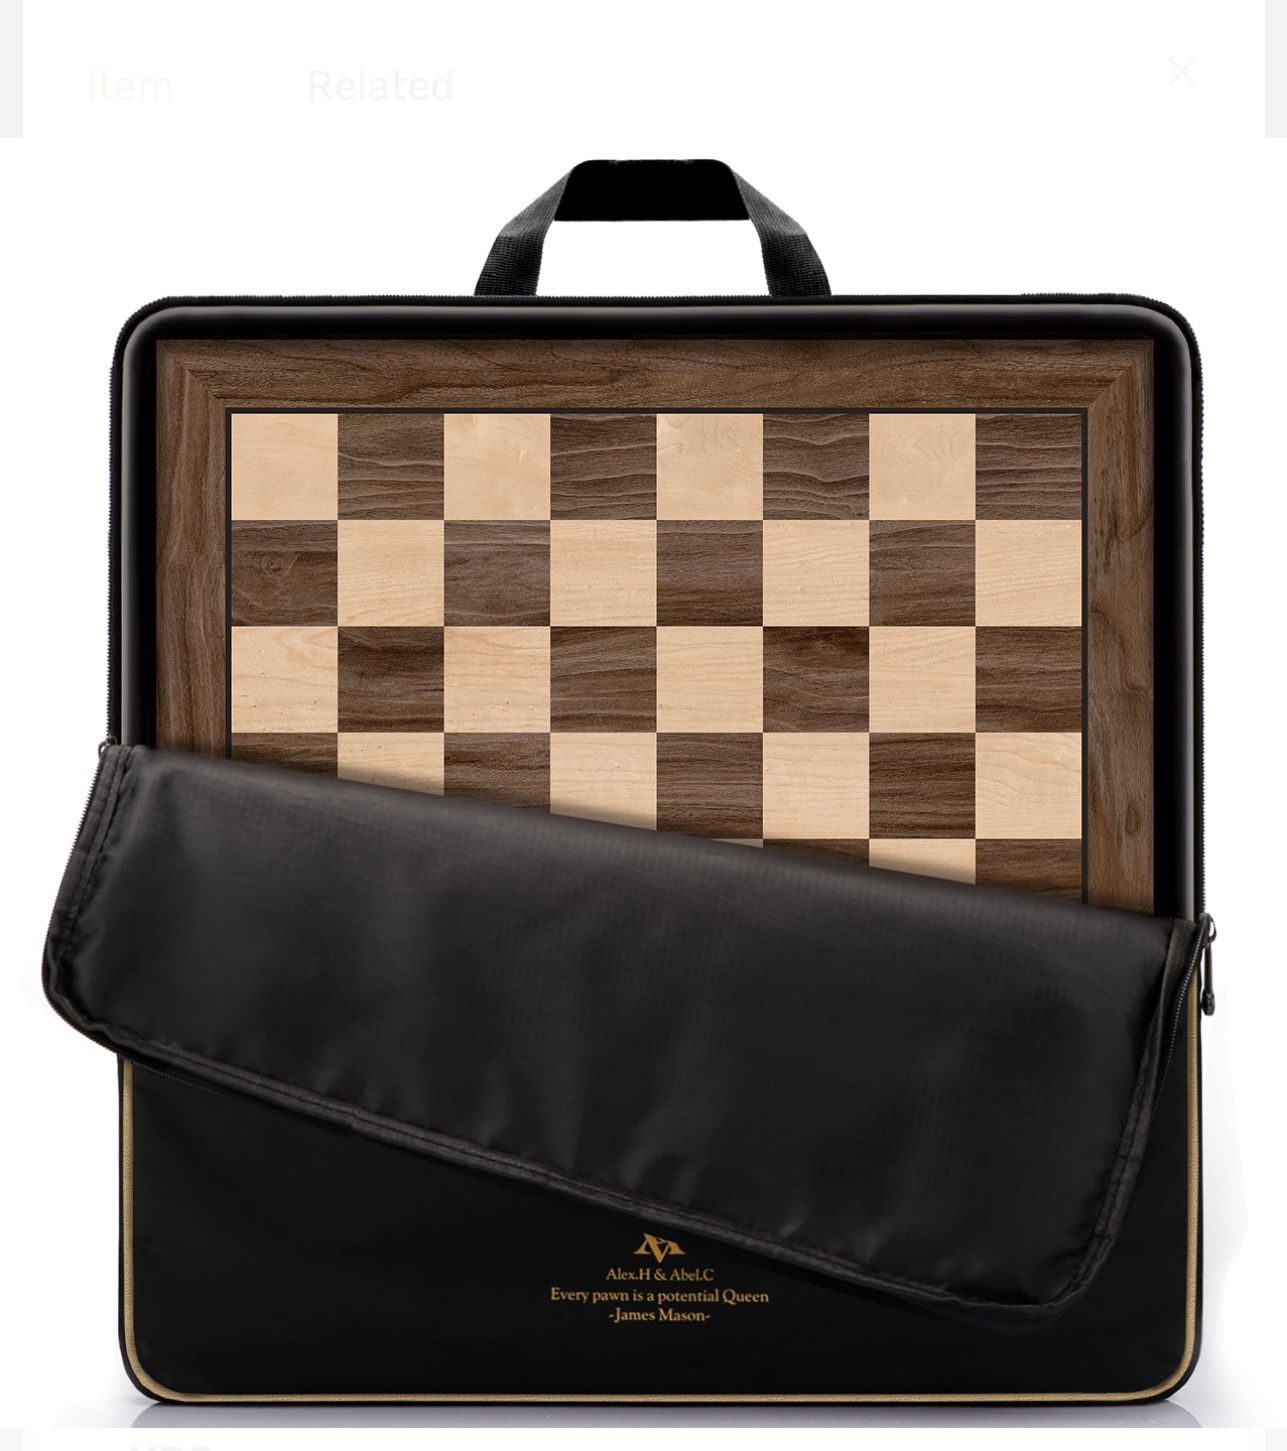 A&a Professional Wooden Tournament Chess Board